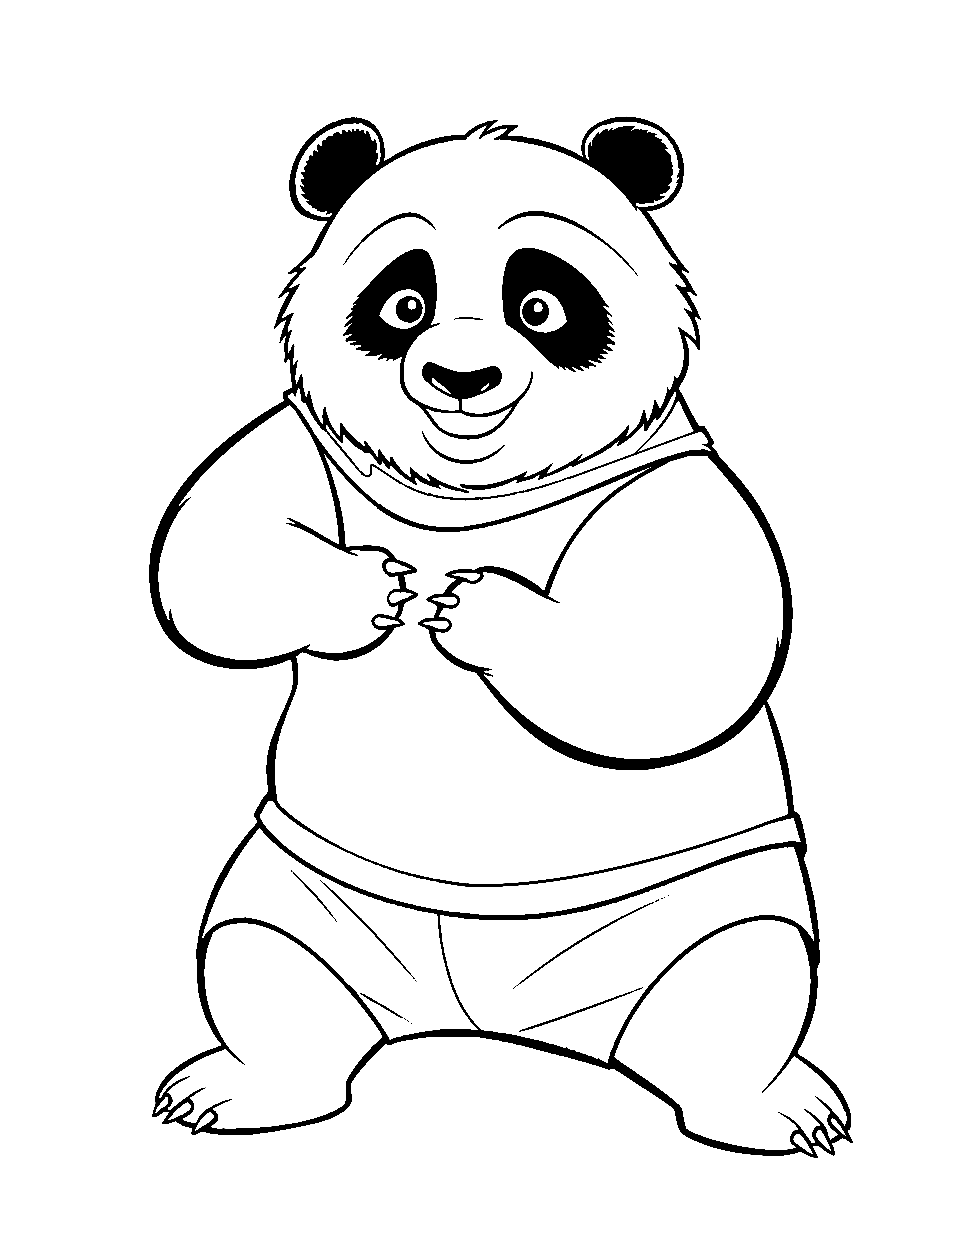 Kung Fu Panda in Action Coloring Page - The well-known Kung Fu Panda character, Po, standing in his karate pose.